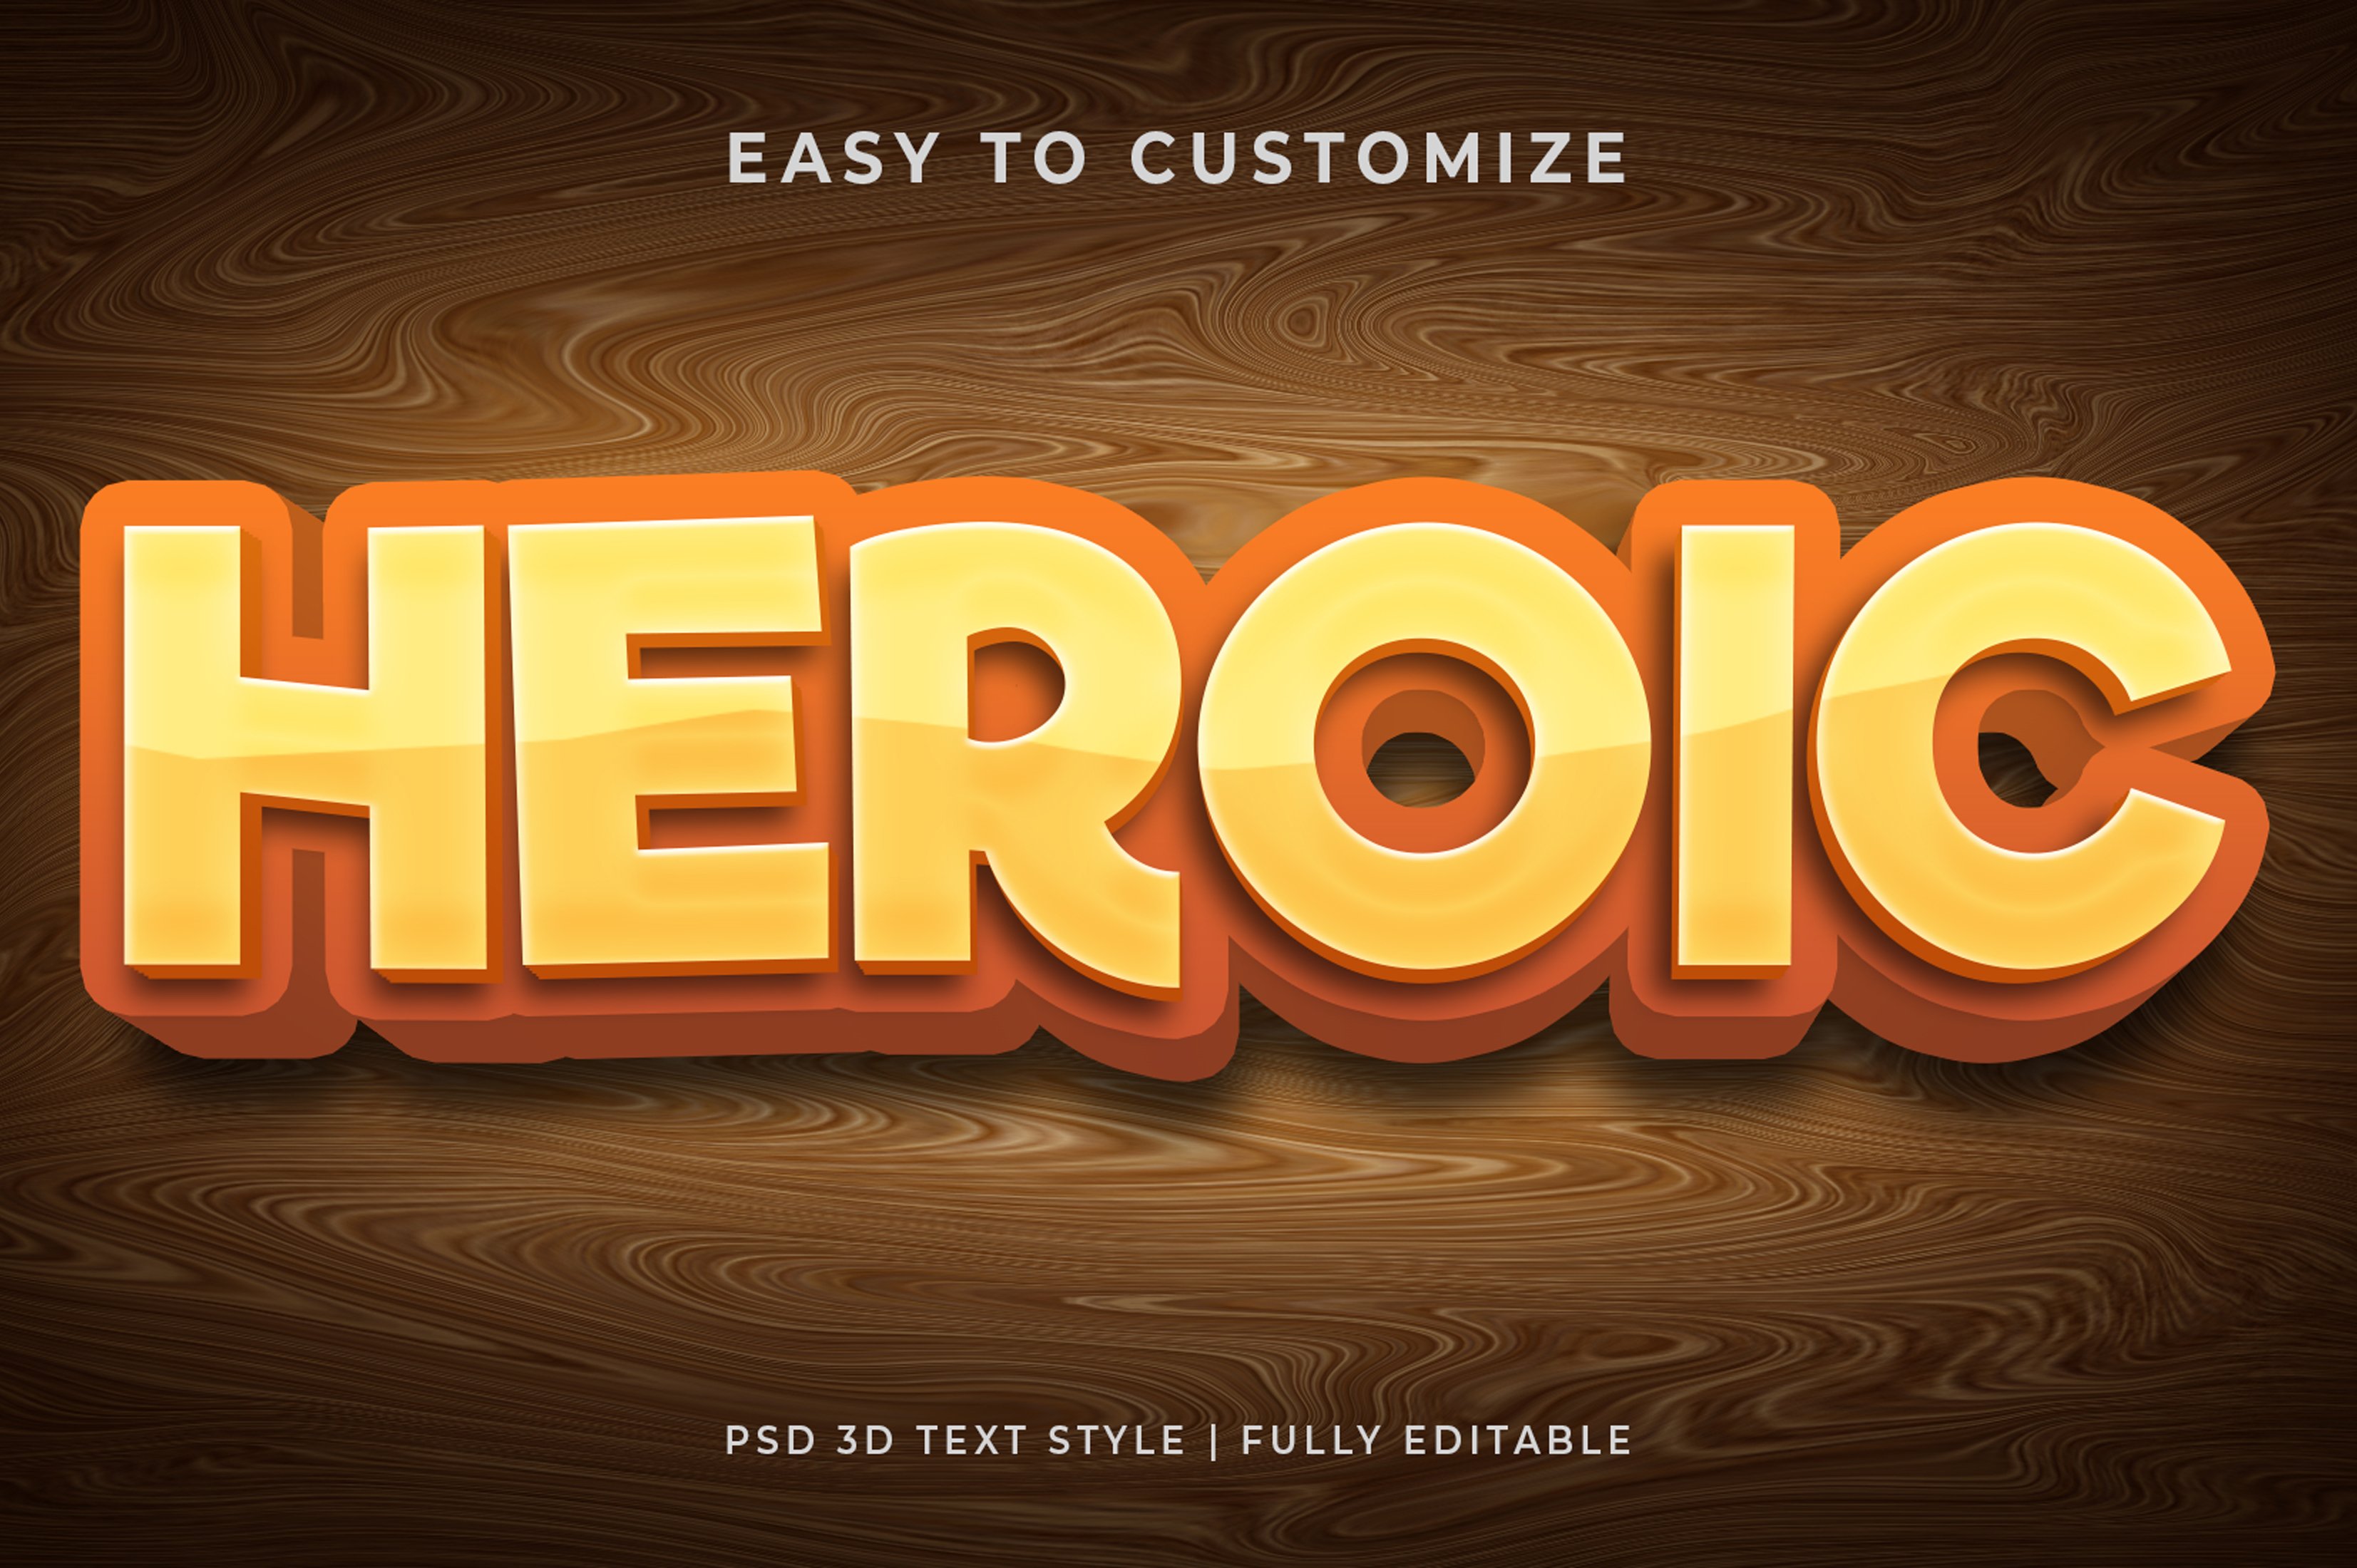 Text Style Effect Mockup on Woodcover image.